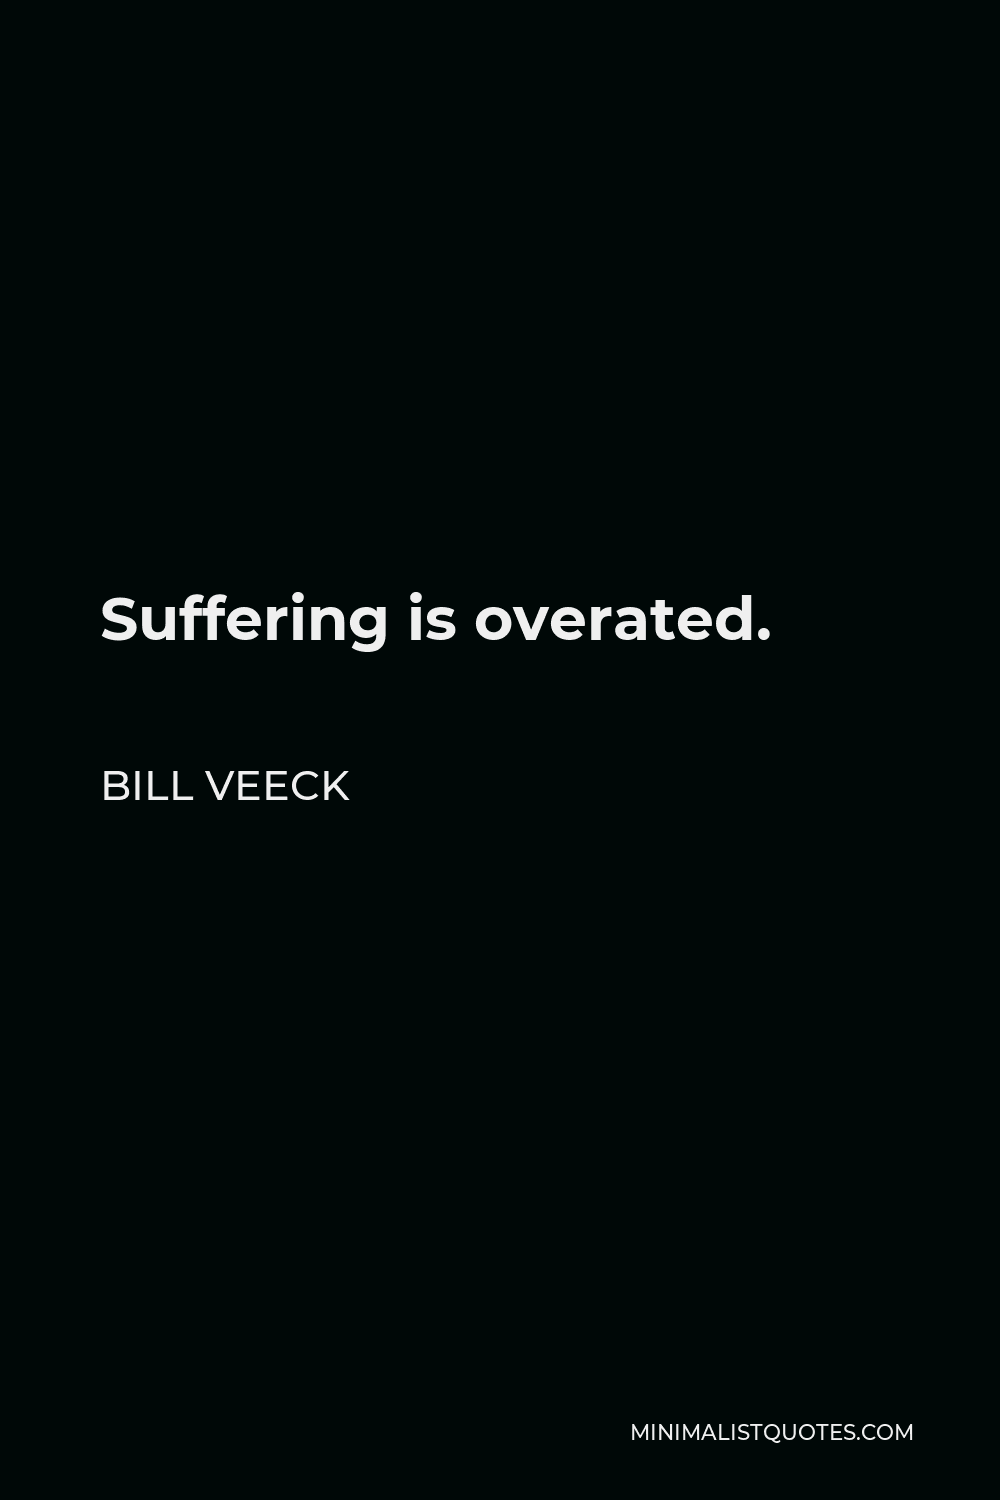 Bill Veeck Quote - Suffering is overated.